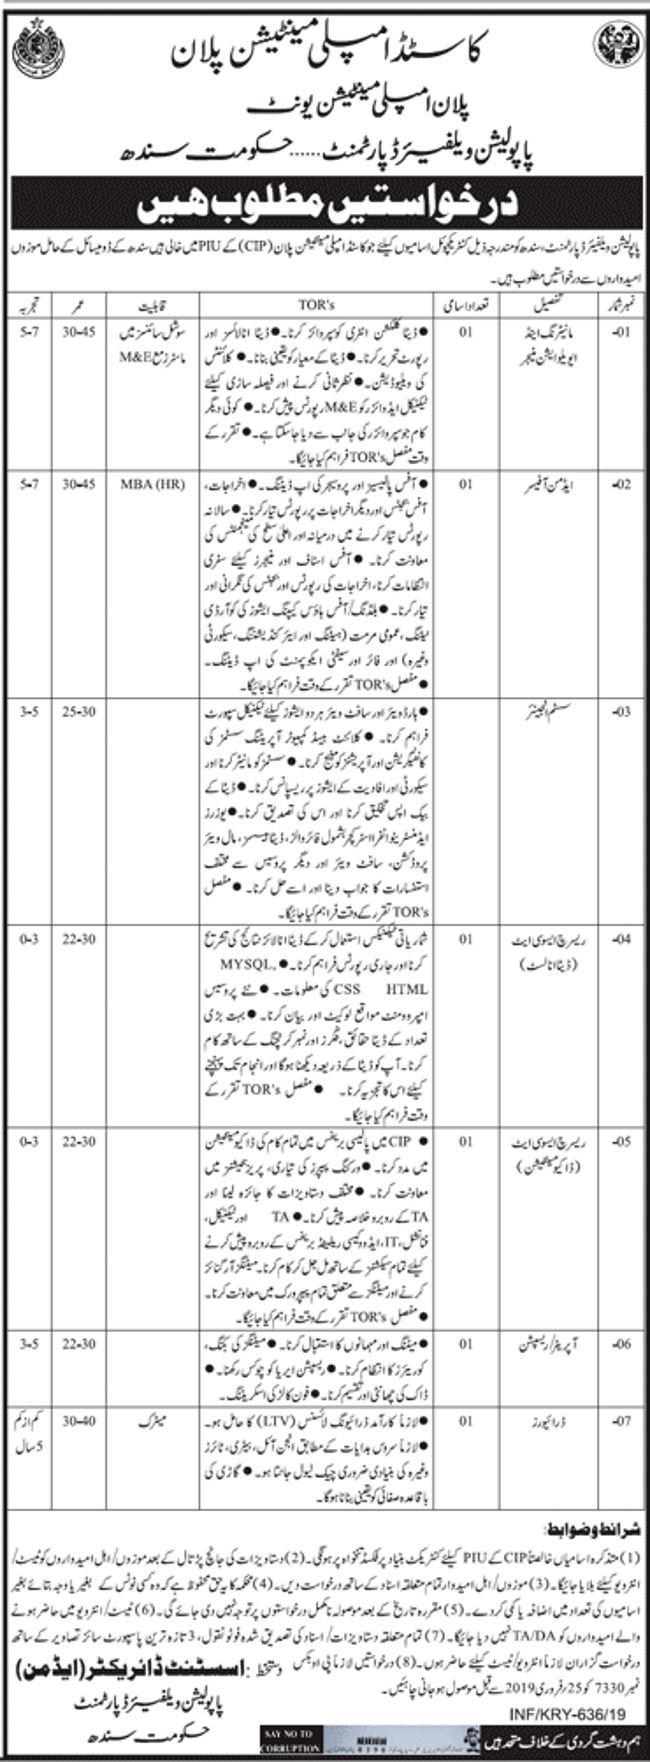 Sindh Population Welfare Department Jobs 2019 for 7+ IT, Research, Admin, M&E, Office & Drivers Posts